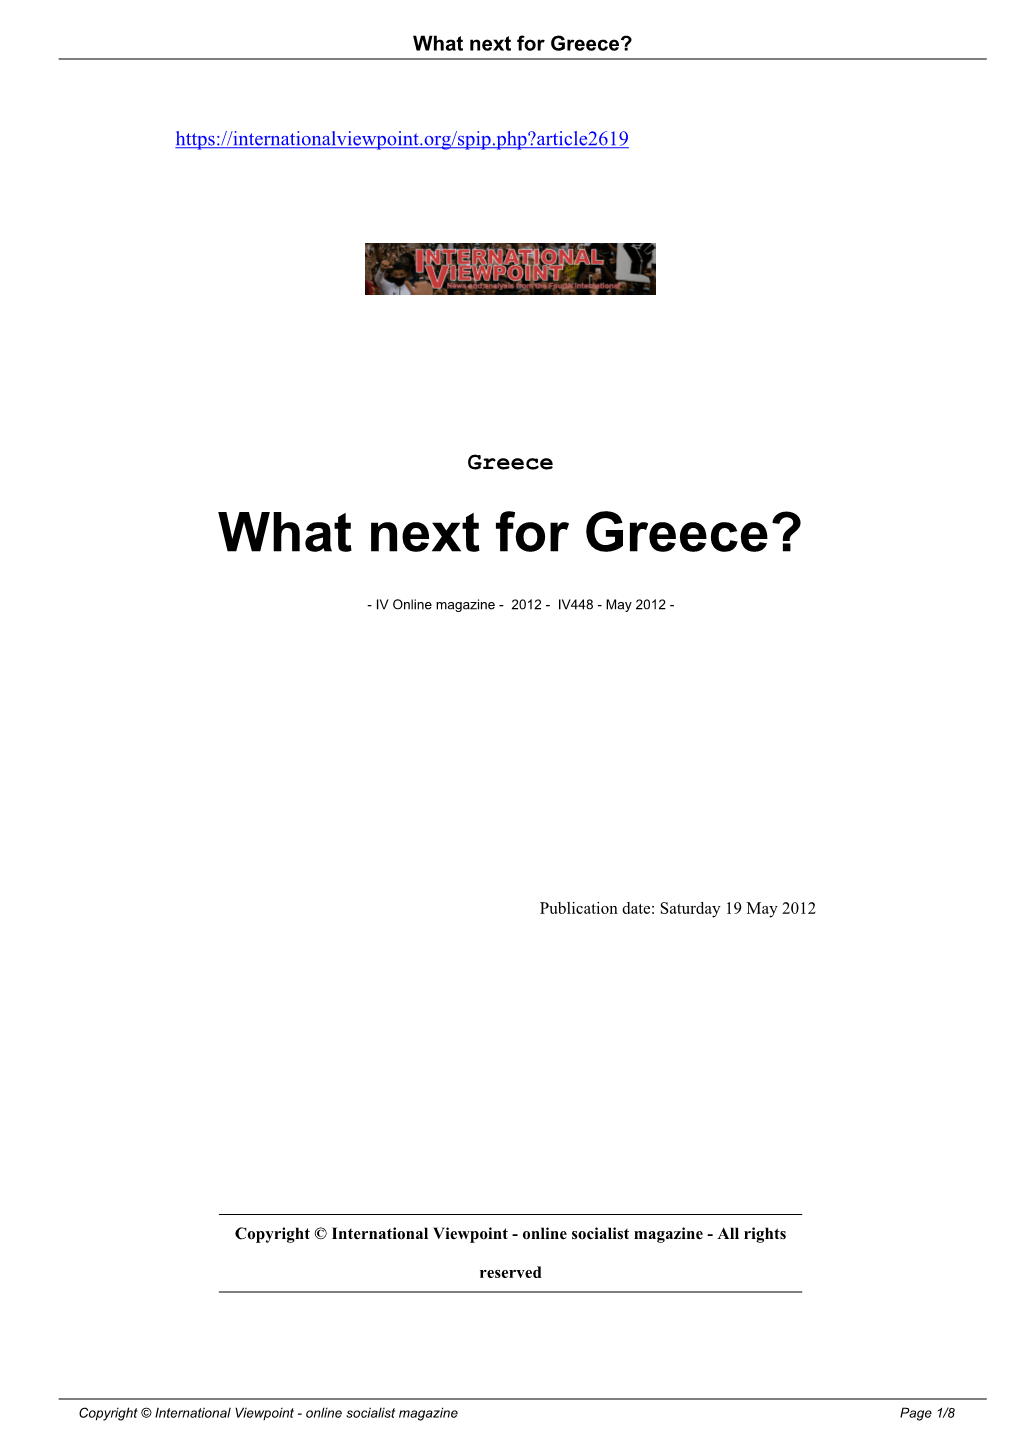 What Next for Greece?